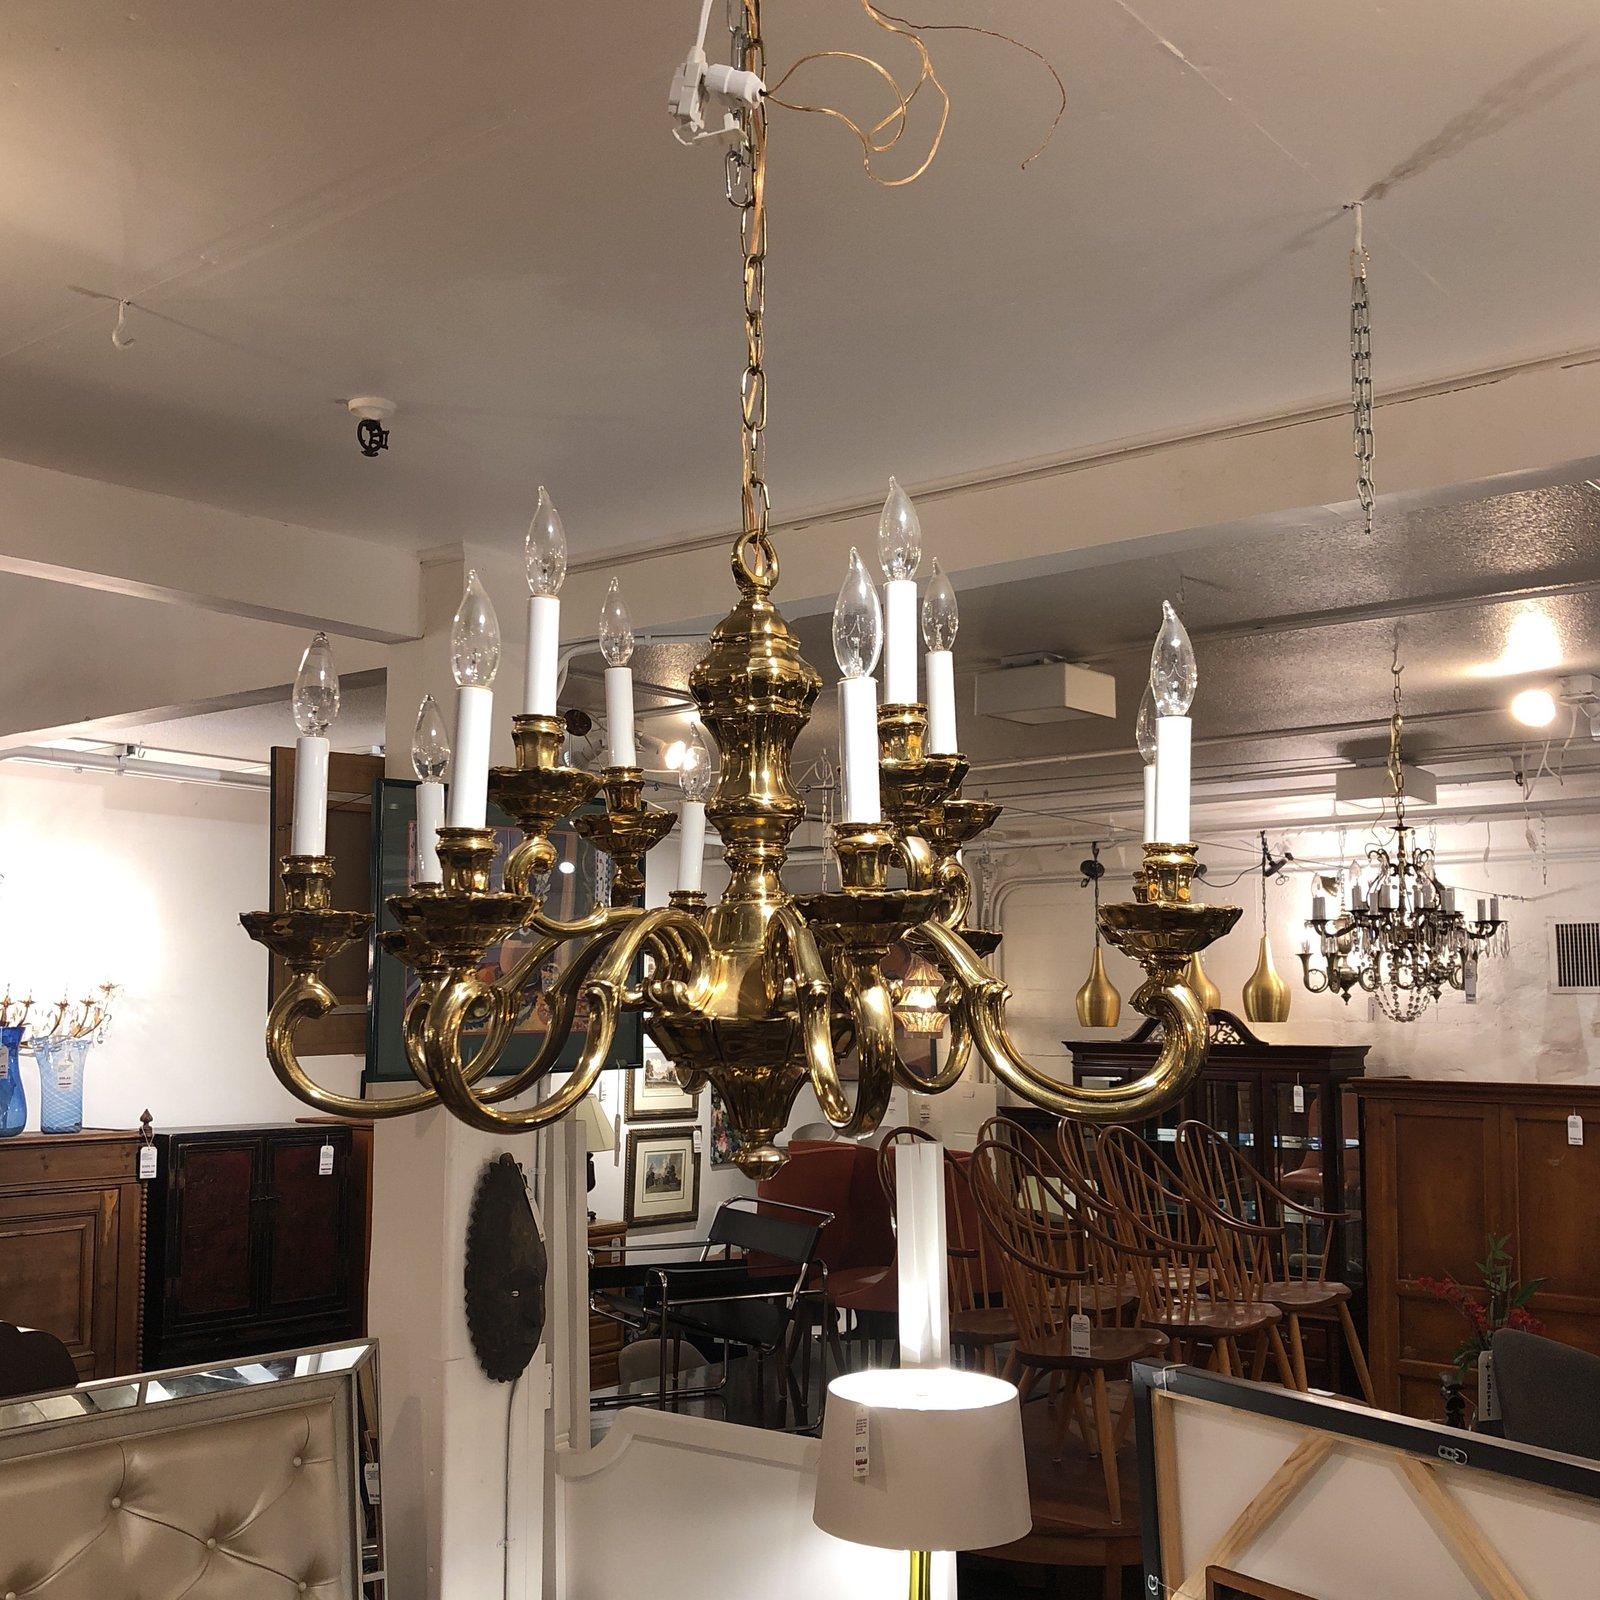 A solid brass chandelier. A Classic candle-style chandelier that consist of twelve lights and arms. Originally purchased from San Francisco Design Center. Original price $4,000.
 